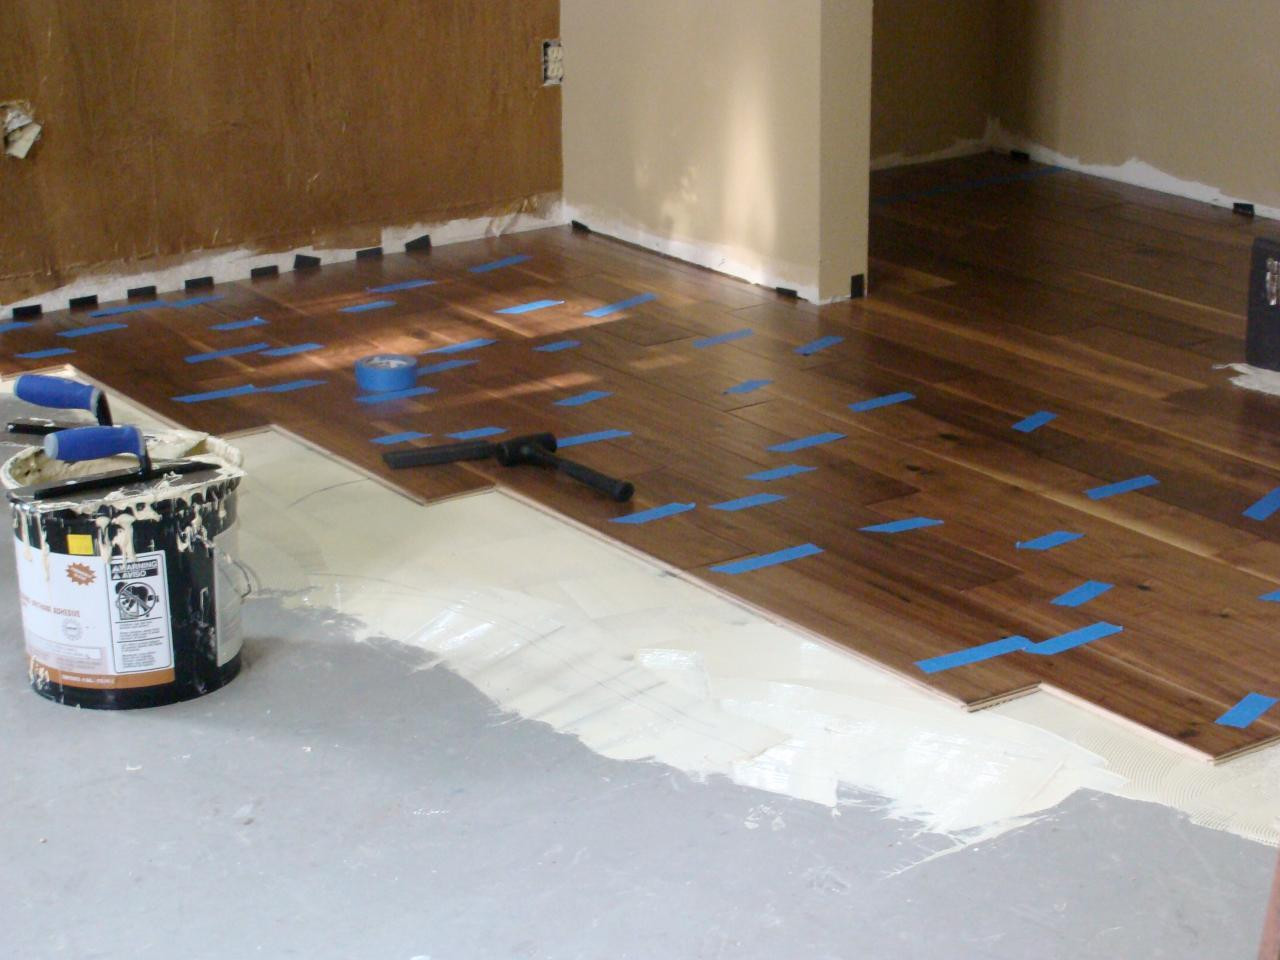 hardwood floor restoration products of luxury of diy wood floor refinishing collection regarding things to know before refinishing old hardwood floors refinishing hardwood floors the family handyman how to refinish hardwood floors part 1 21 frais